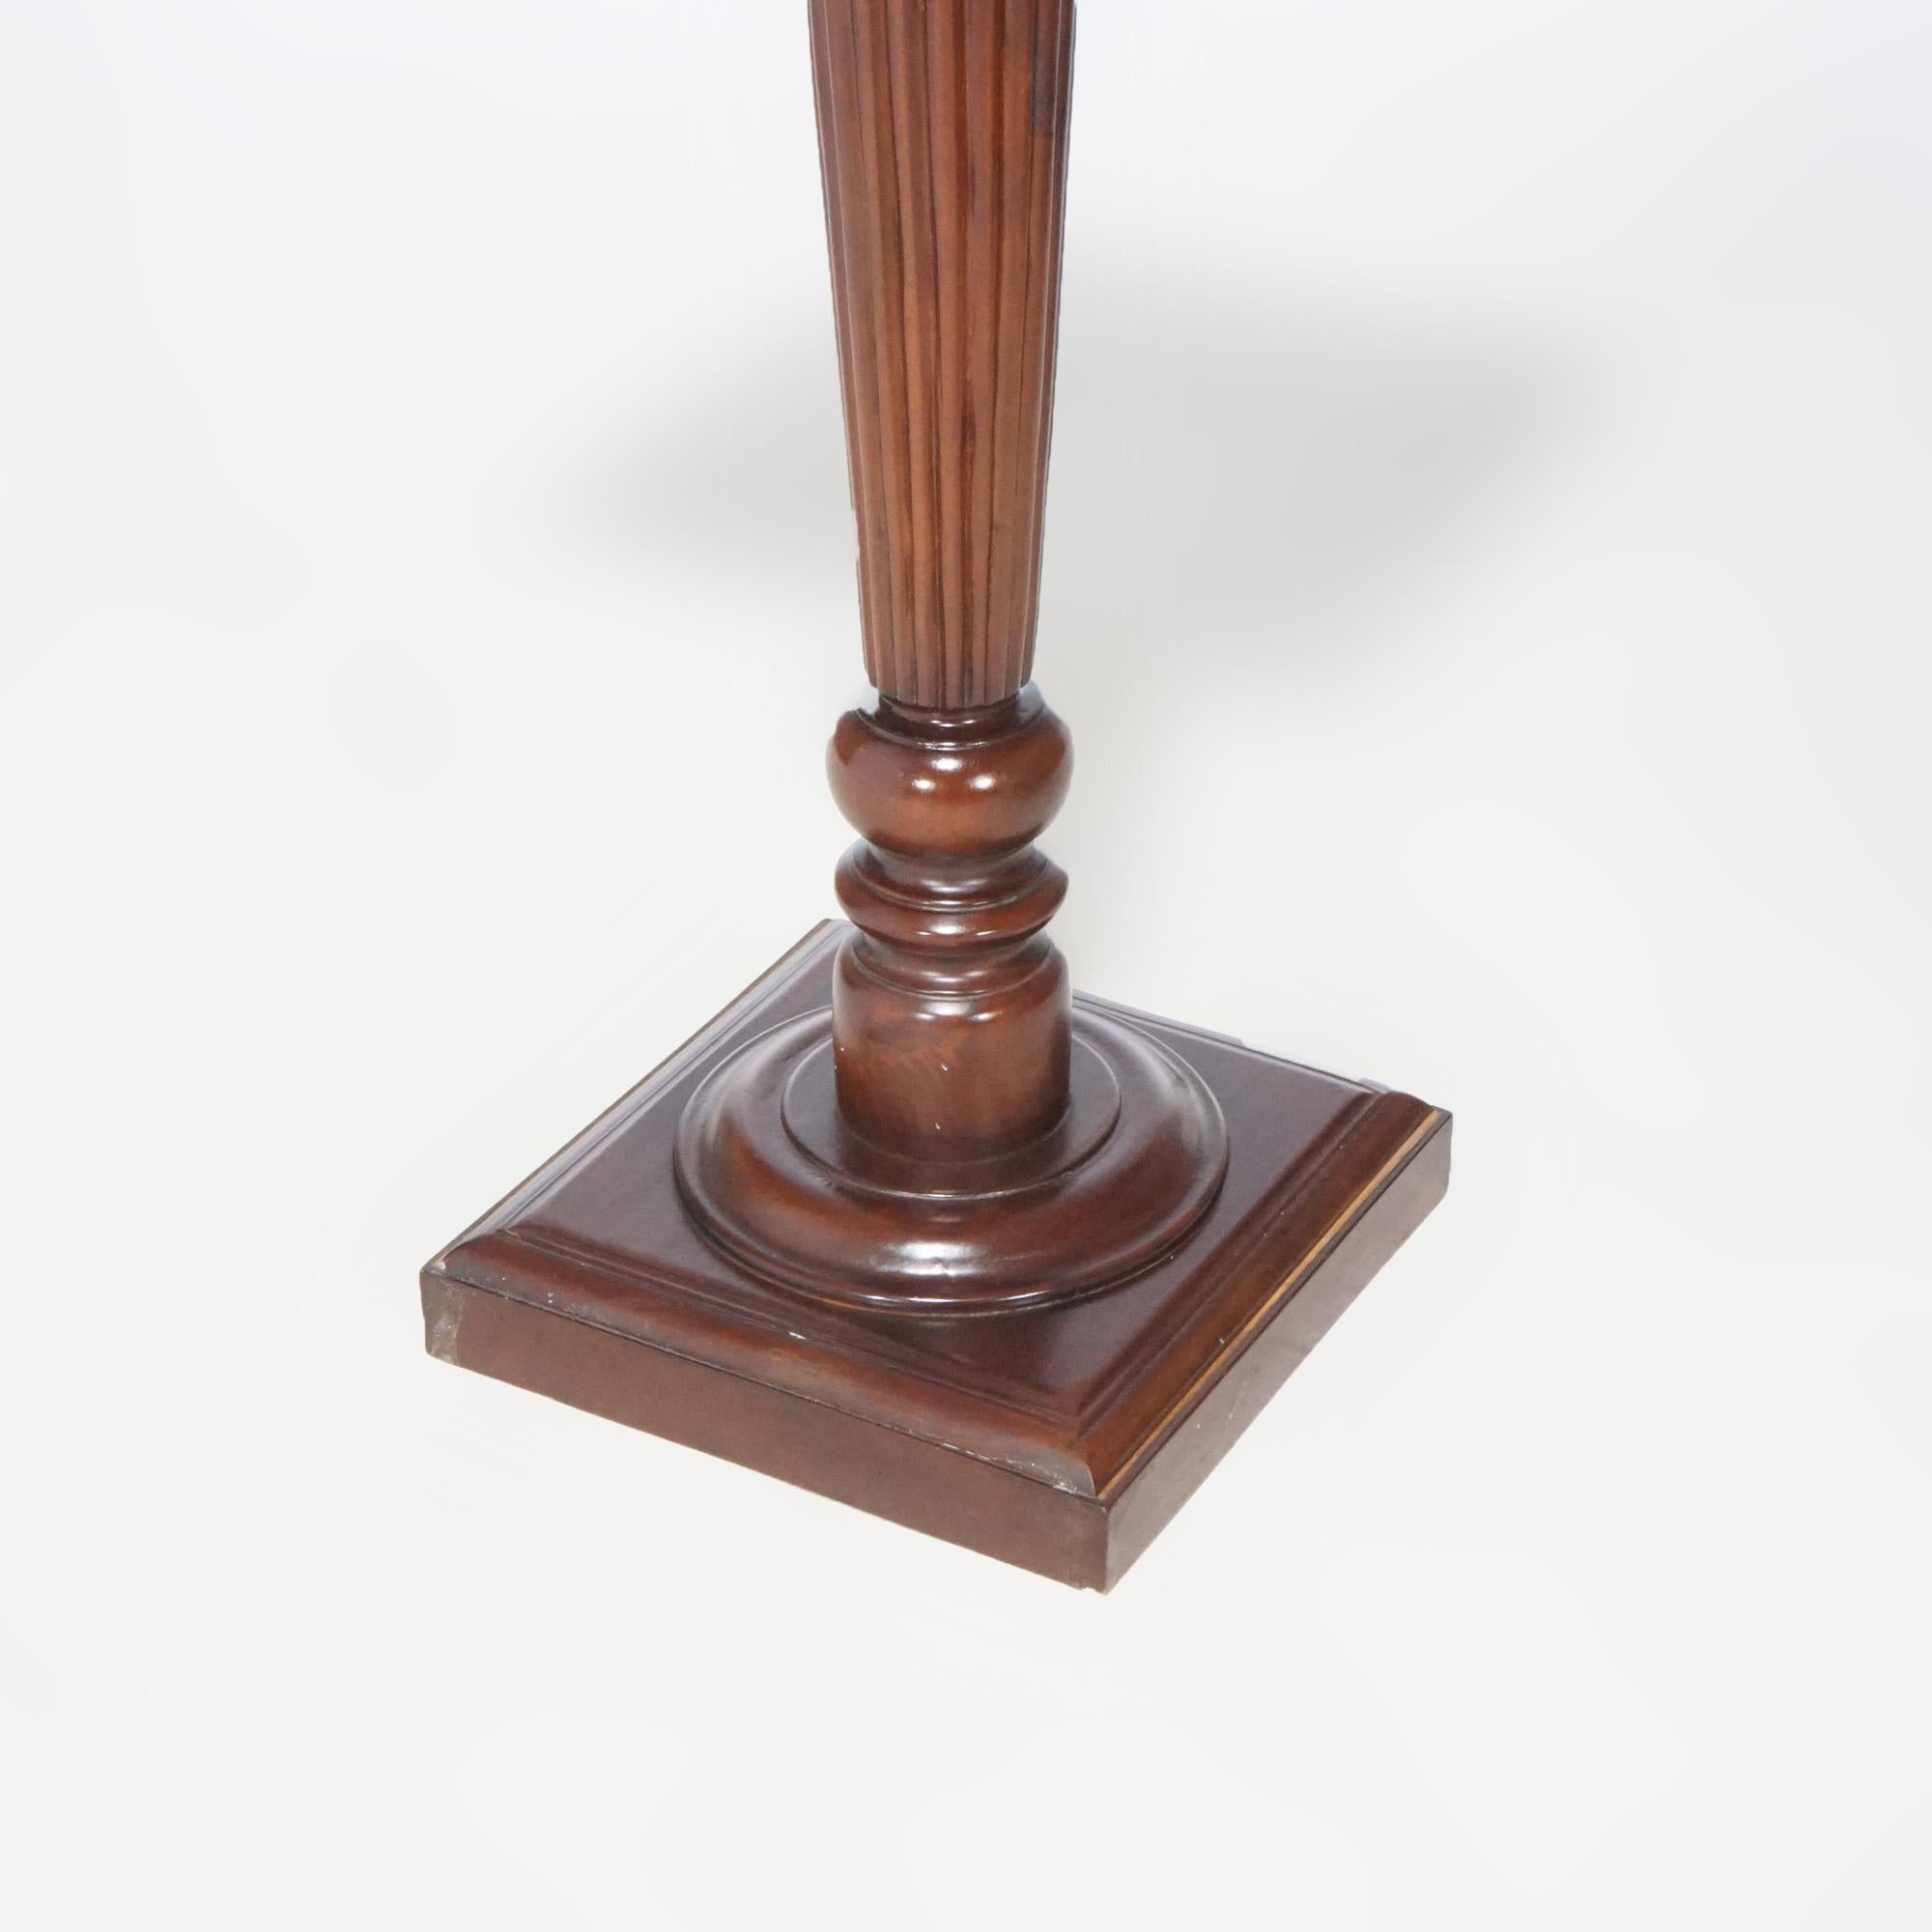 Antique Neoclassical Carved Mahogany Sculpture Display Pedestal, circa 1900 For Sale 2